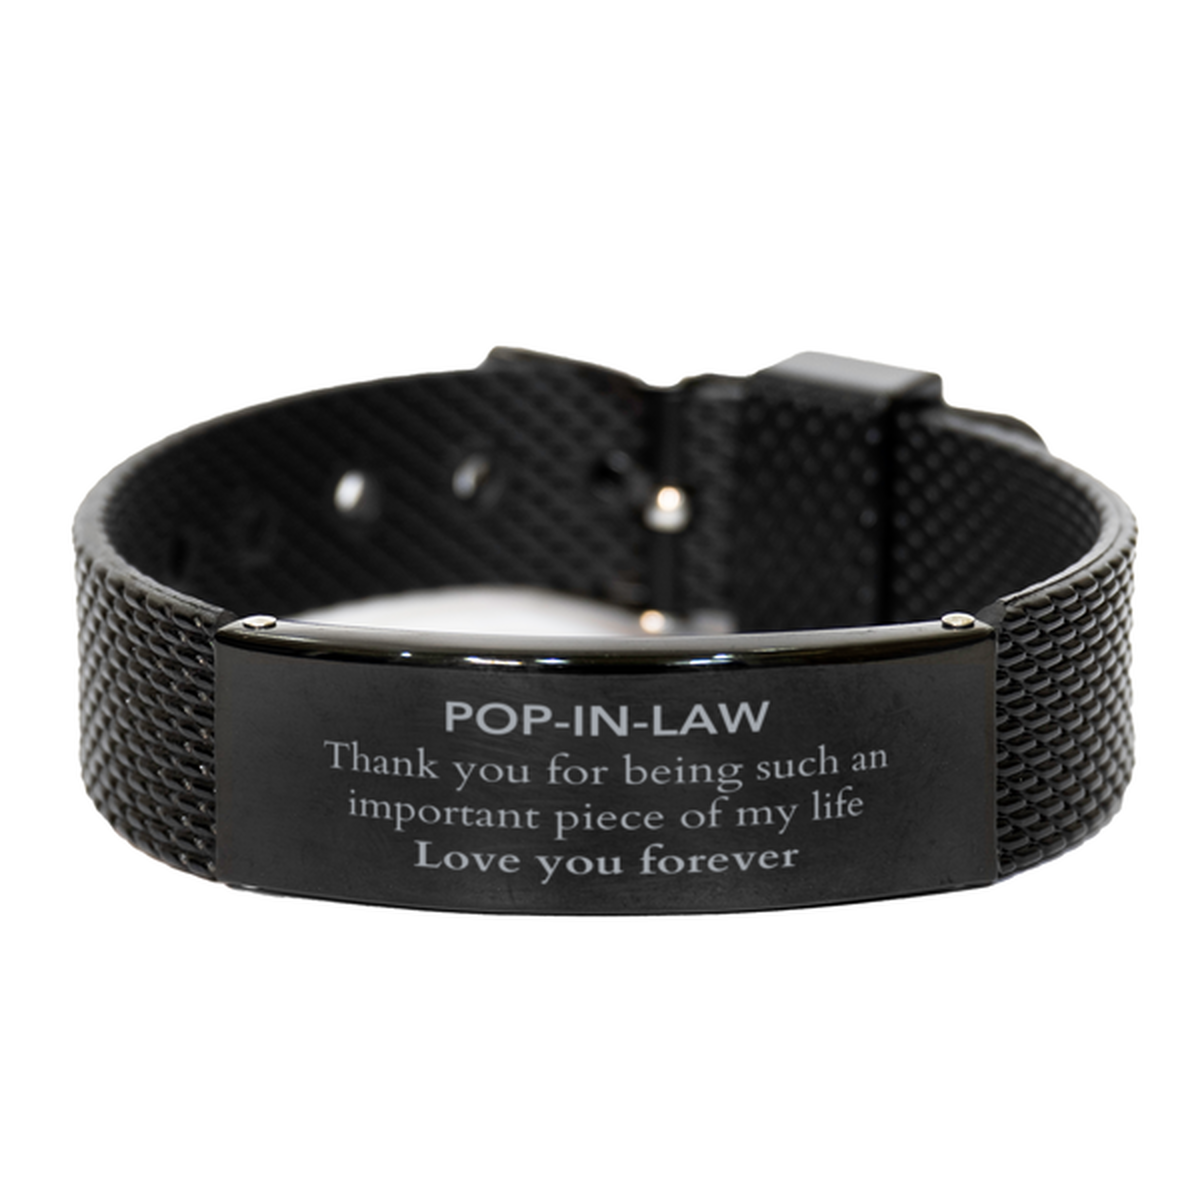 Appropriate Pop-in-law Black Shark Mesh Bracelet Epic Birthday Gifts for Pop-in-law Thank you for being such an important piece of my life Pop-in-law Christmas Mothers Fathers Day